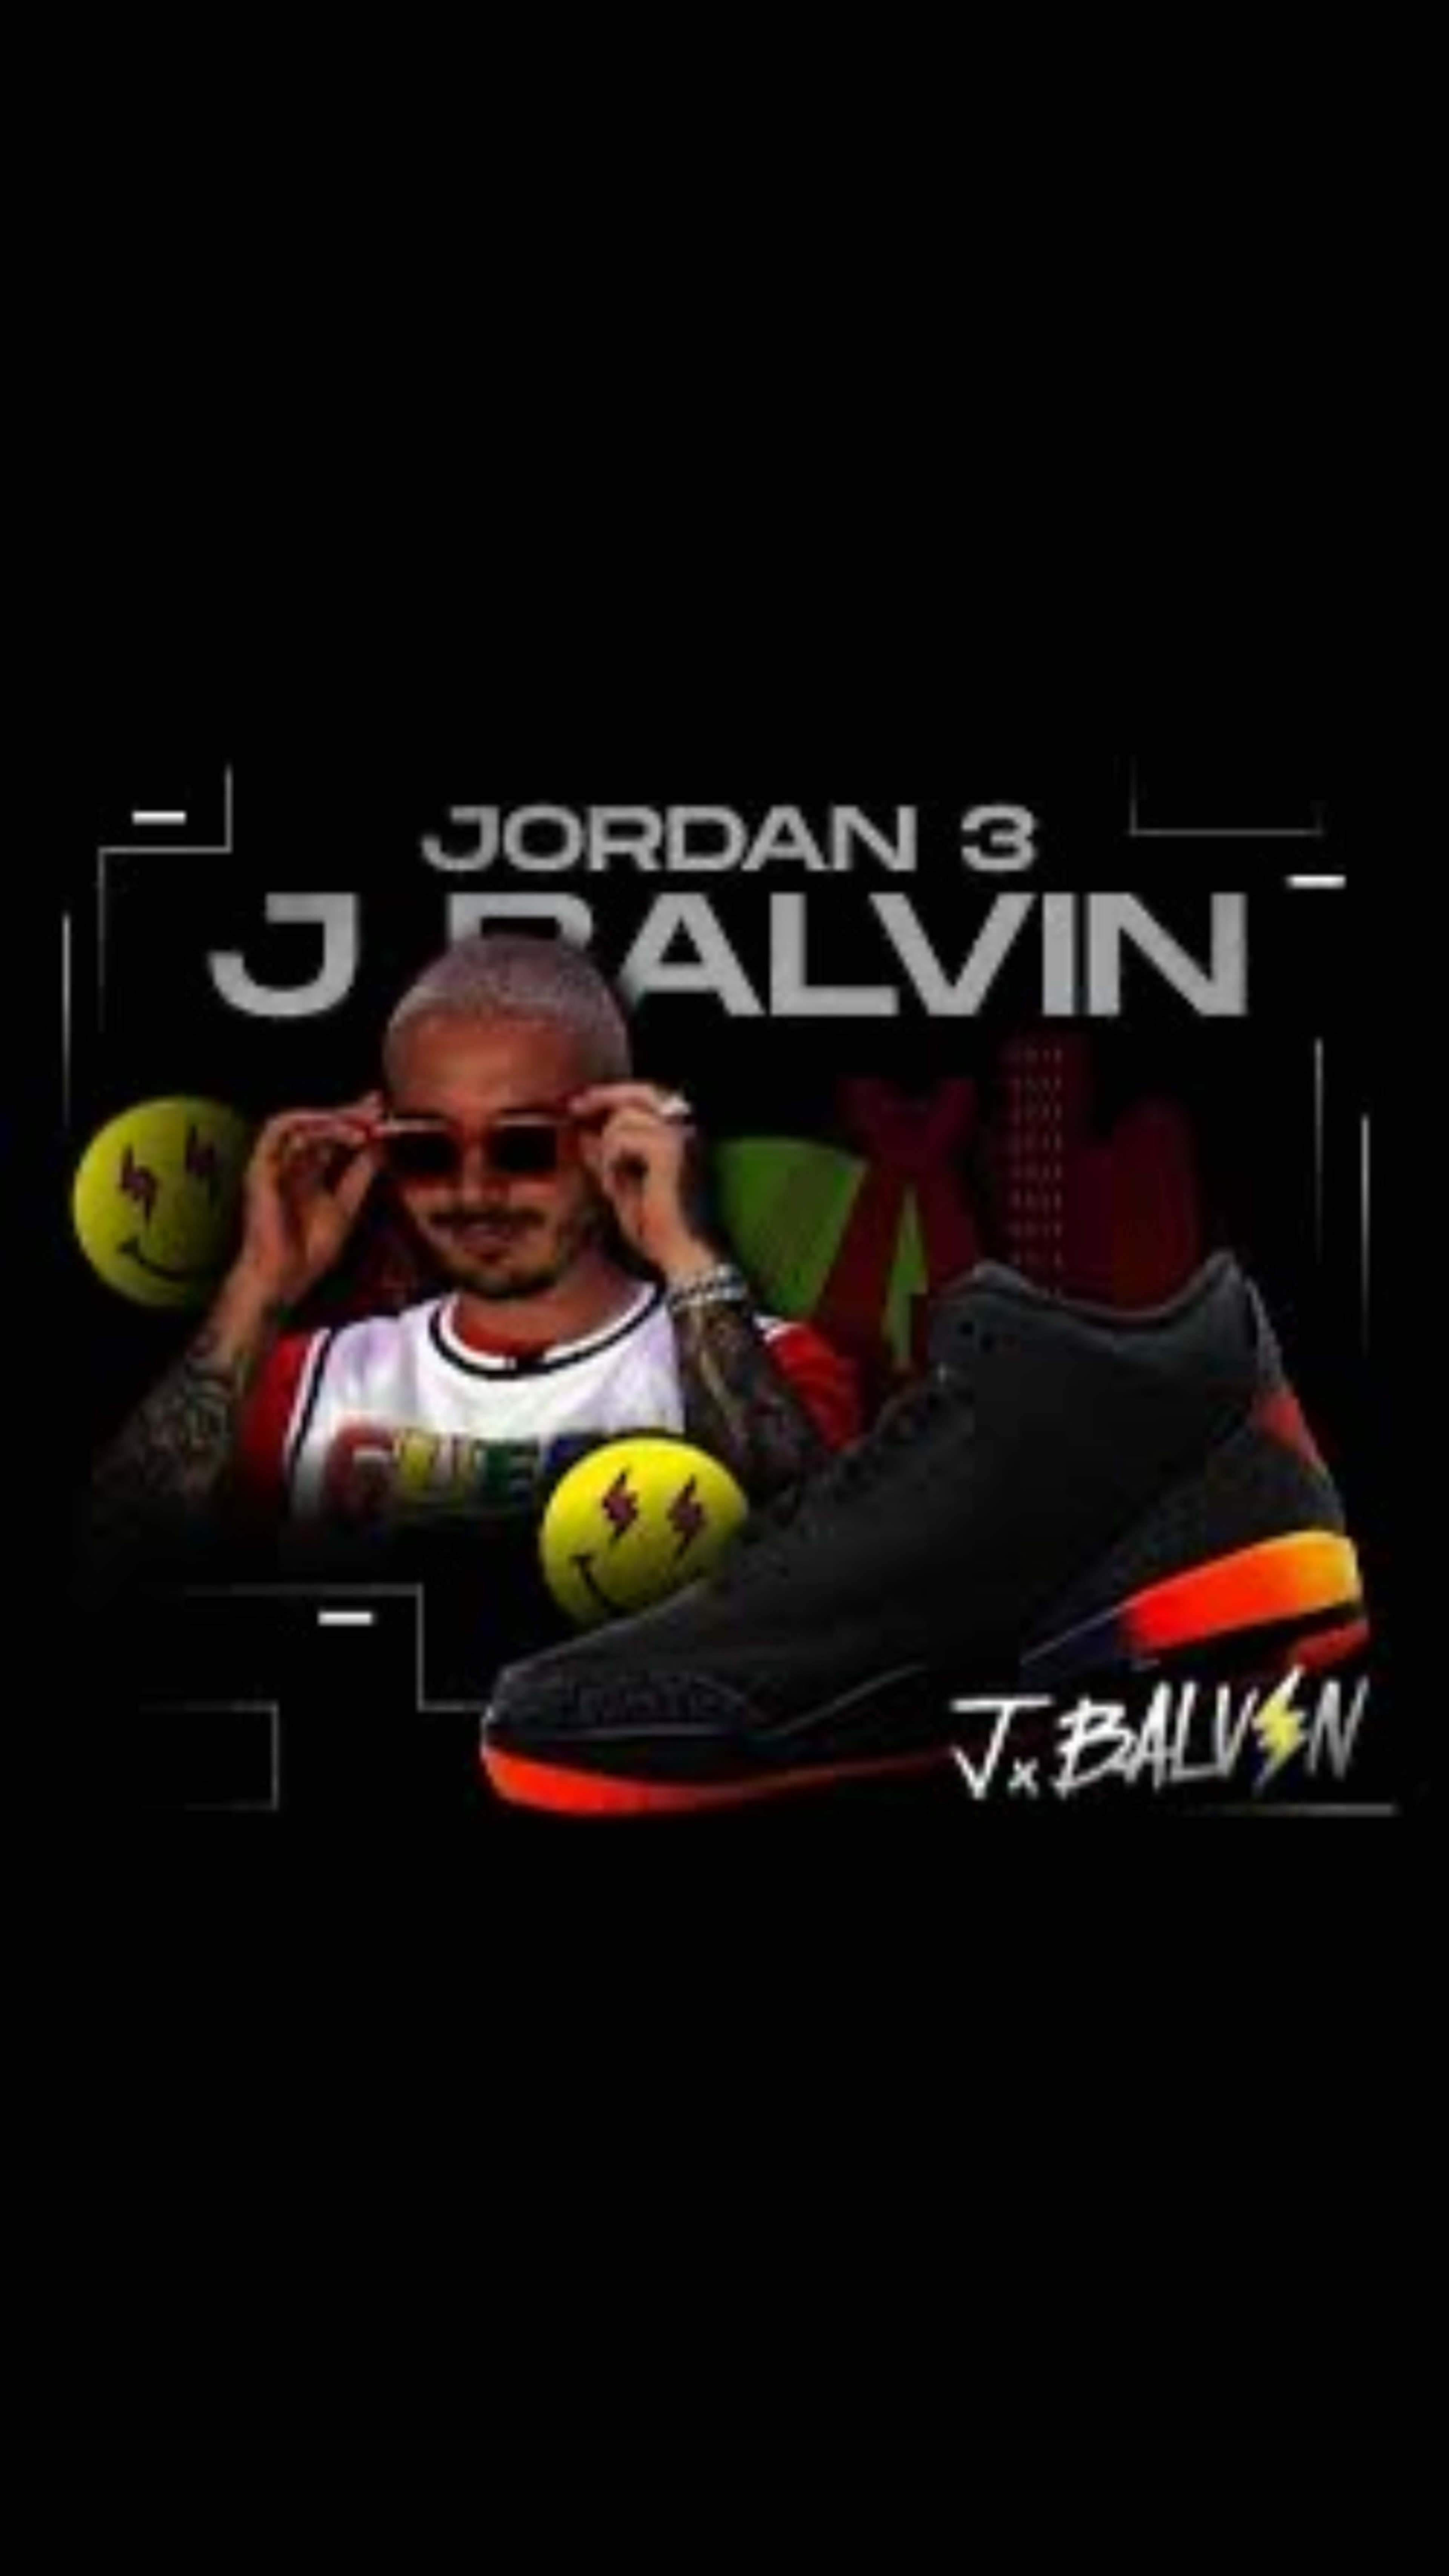 Preview image for the show titled "MYSTERY WHEEL- ANY SIZE JORDAN 3 J BALVIN RIO & INSTA HITS!" at Today @ 1:25 AM